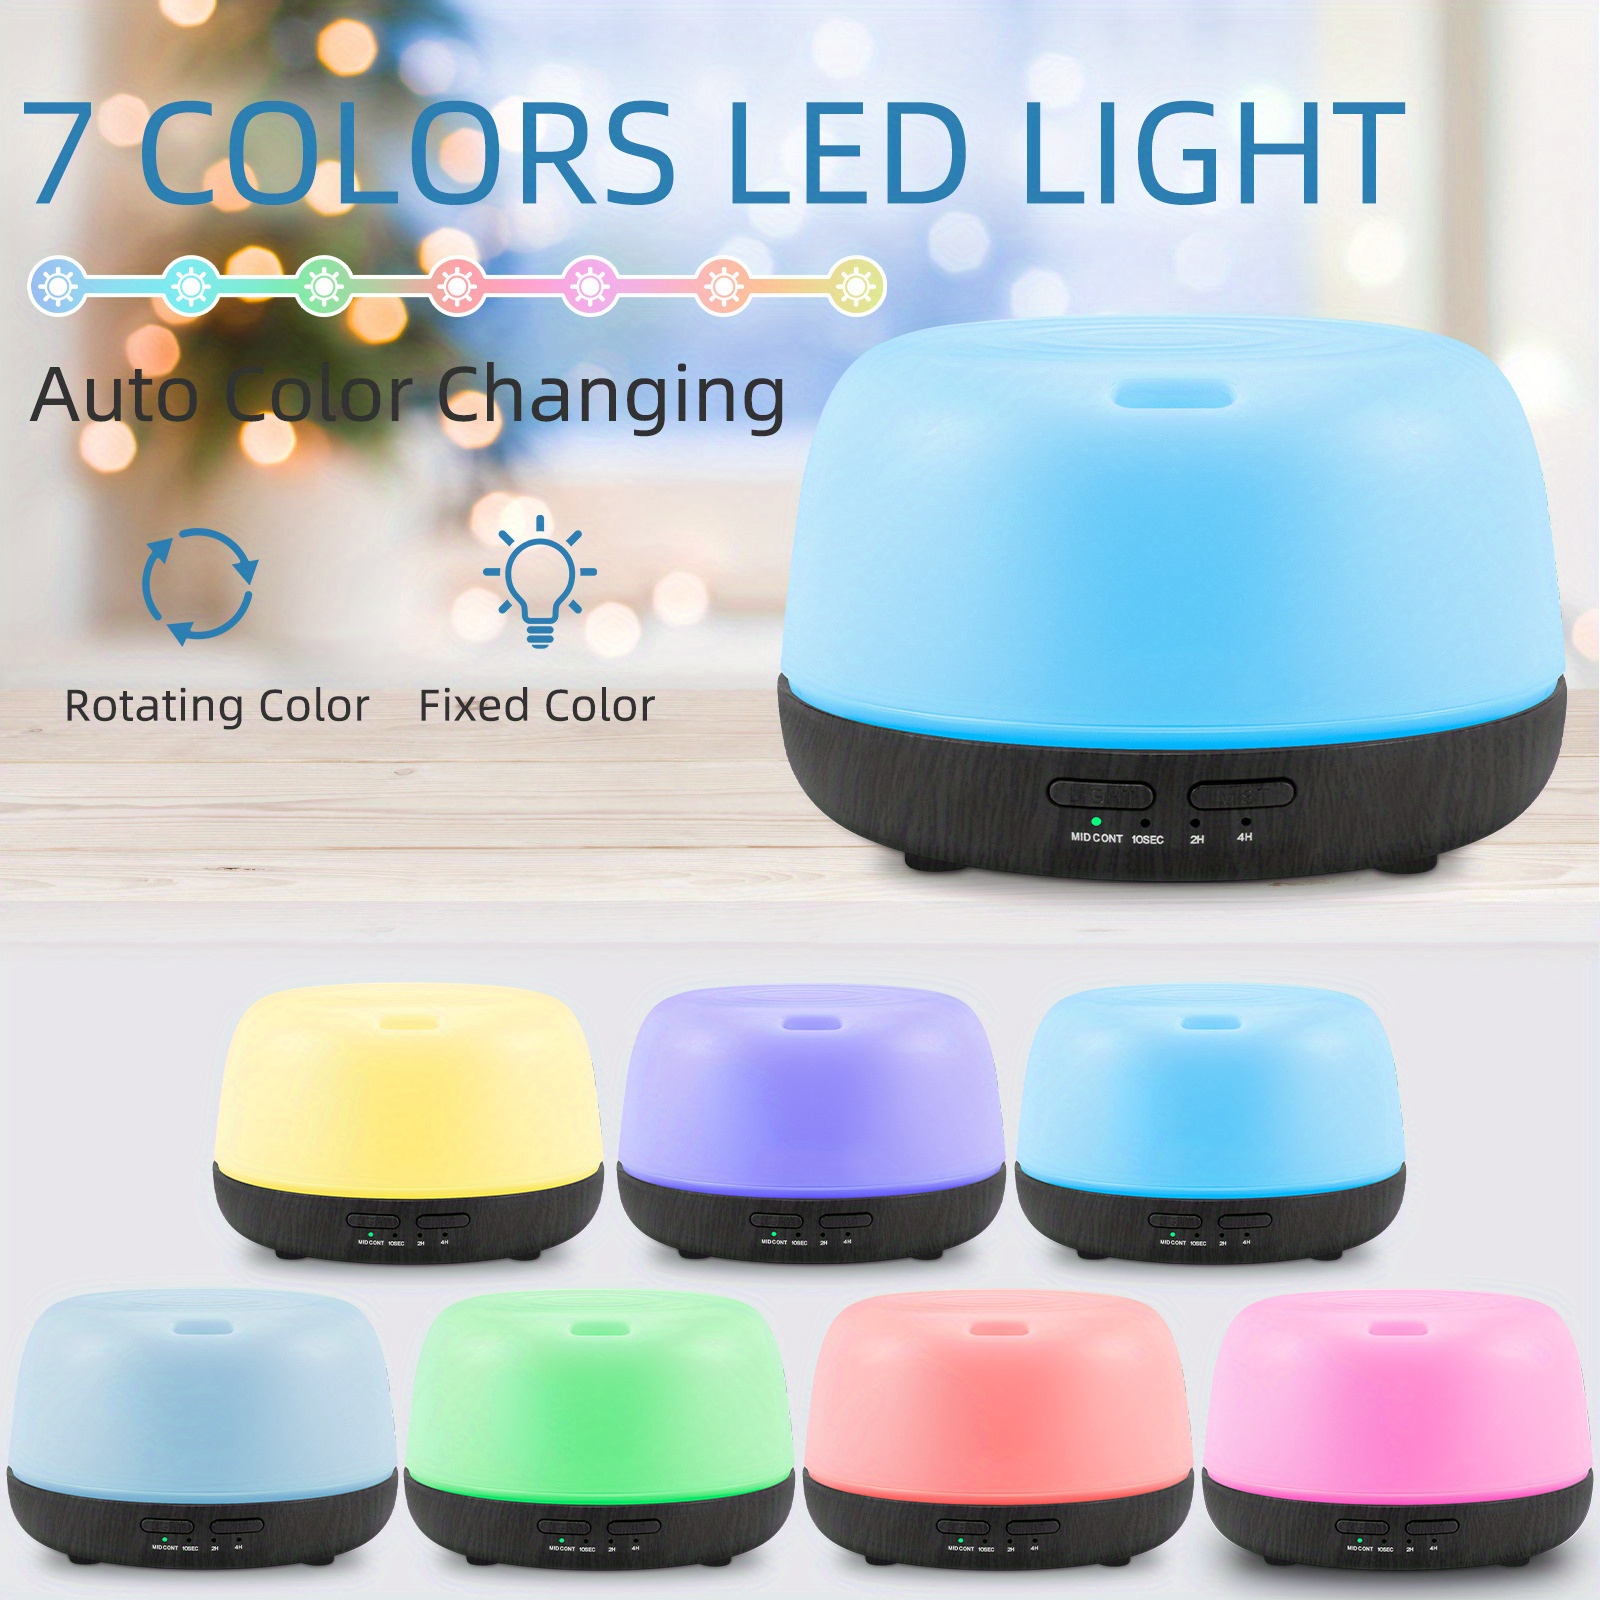 SEEDSEEL Car Aromatherapy Diffusers for Essential Oils，Mini USB Air Scent  Small Humidifier with 7-LED Color Changing for Car Room Home Office Bedroom